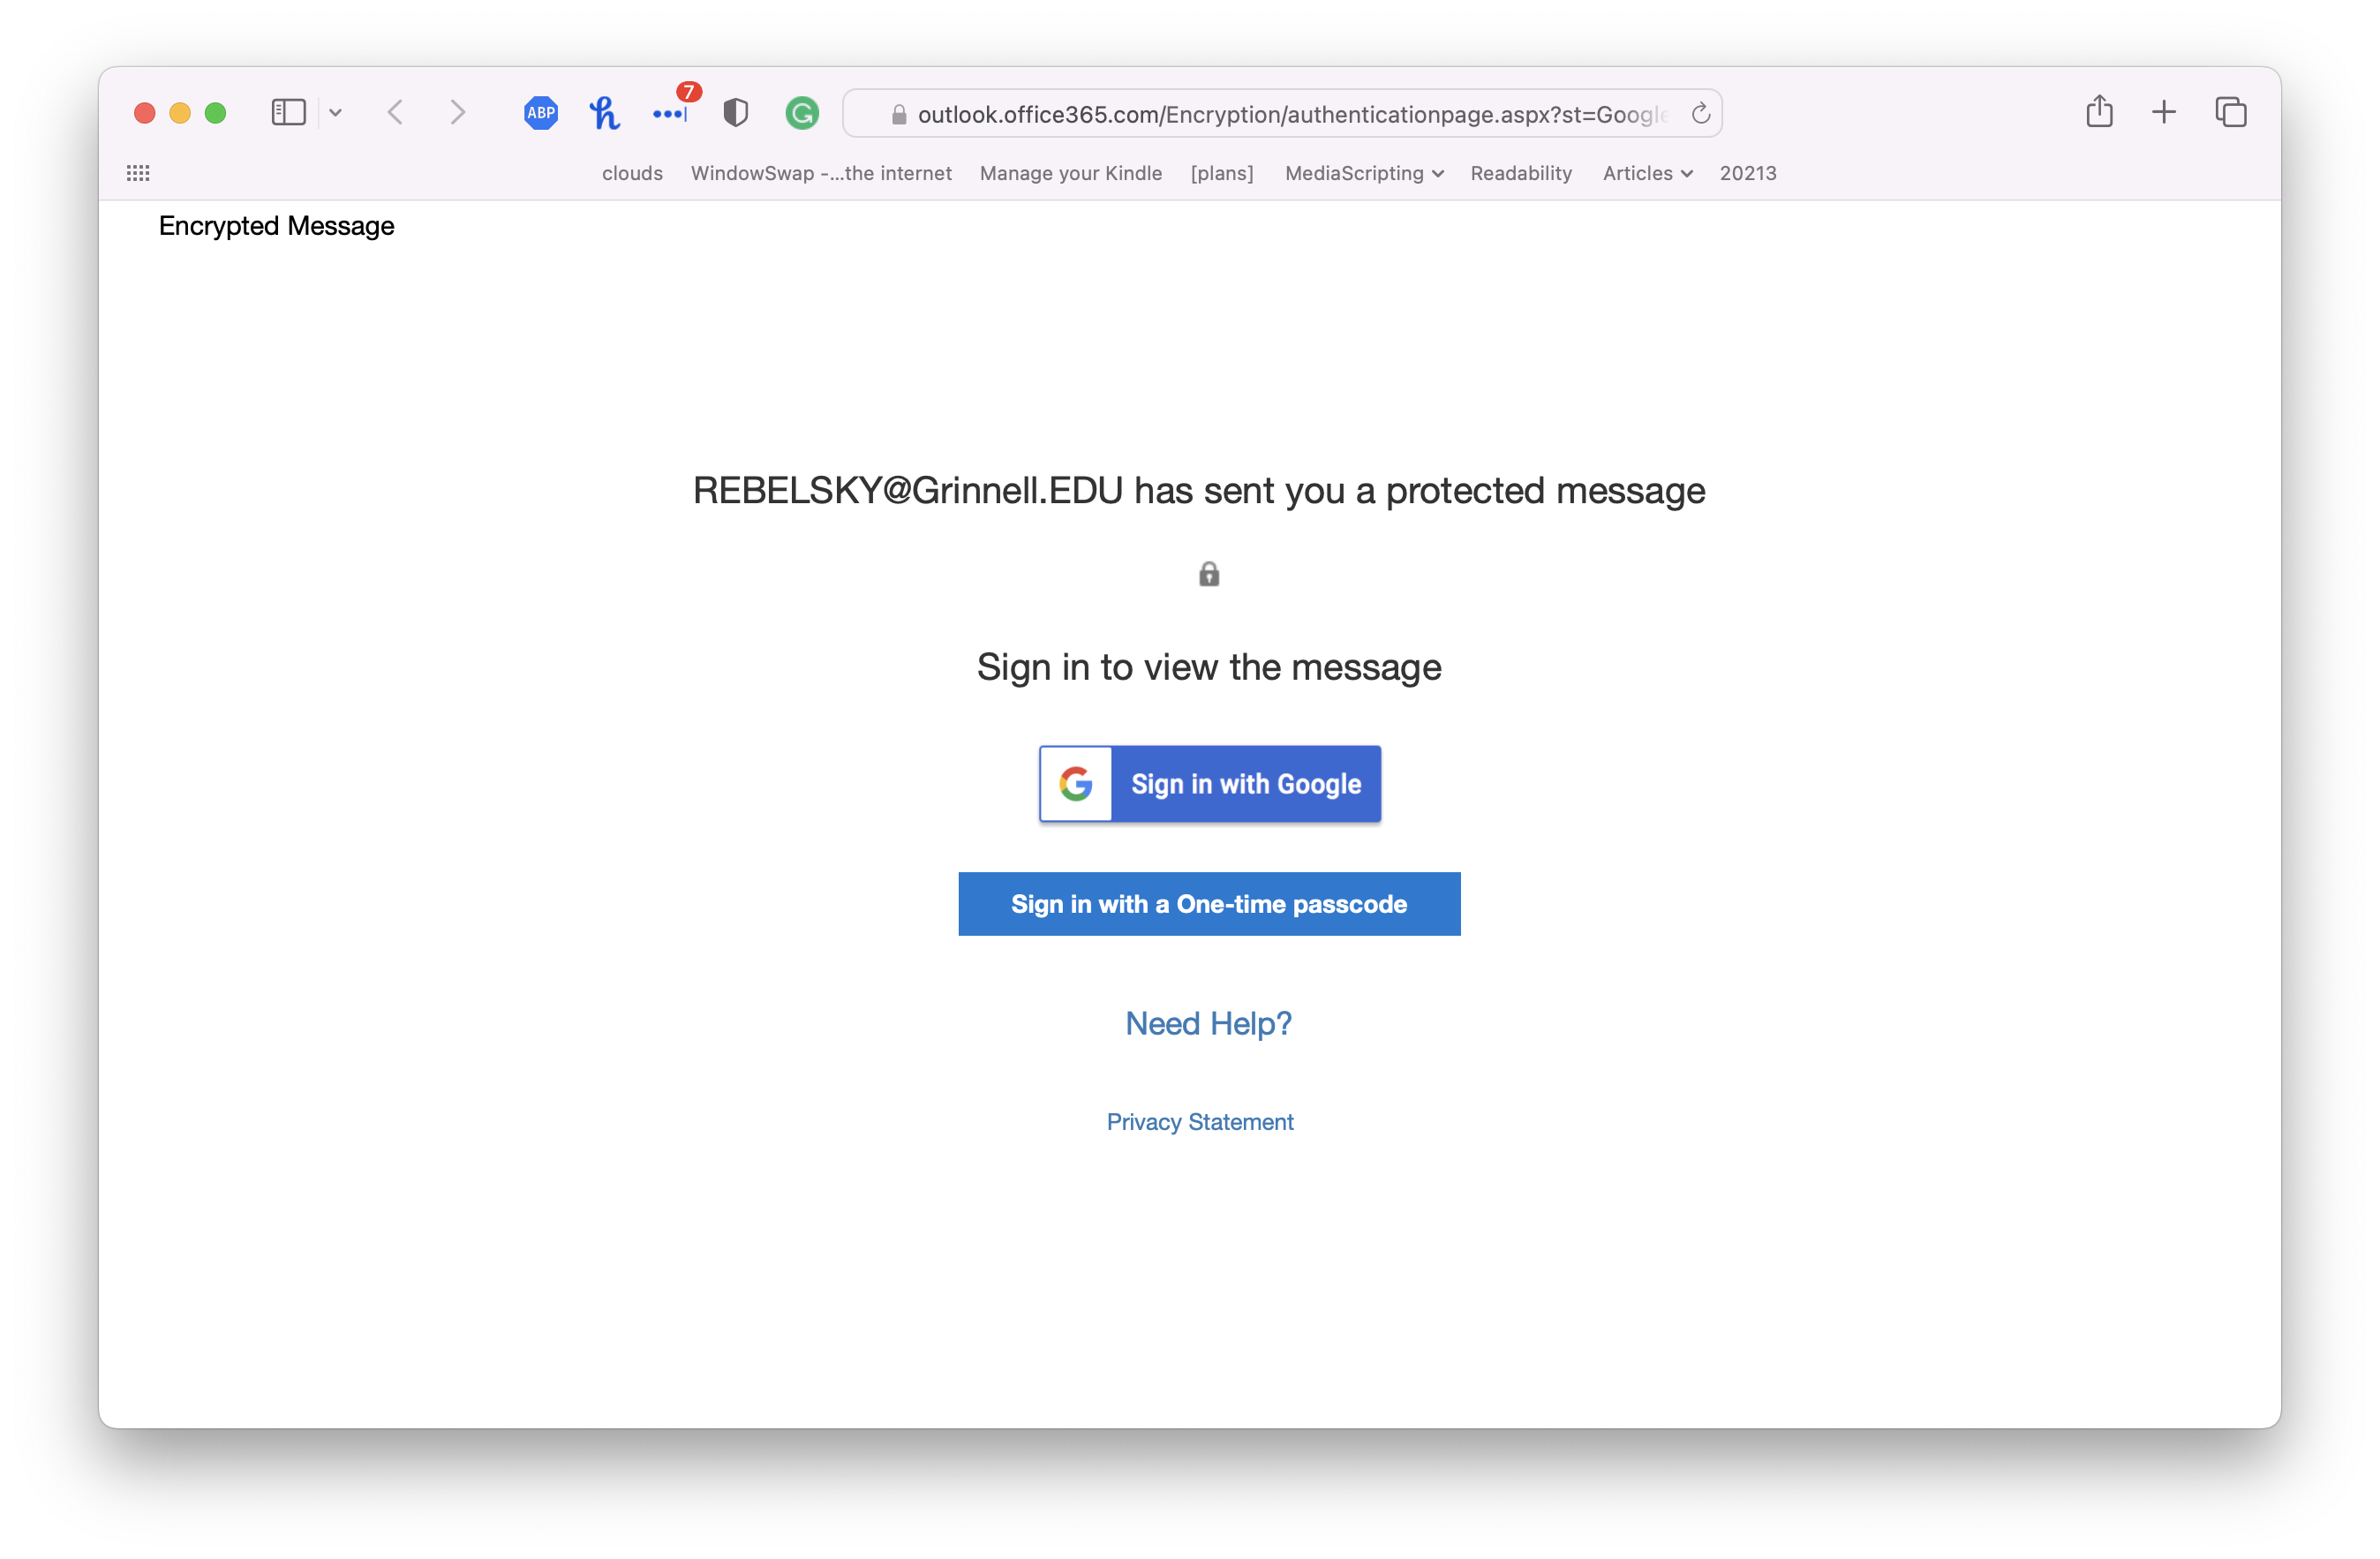 A screenshot from a Web browser.  'REBELSKY@Grinnell.EDU has sent you a protected message.  Sign in to view the message'  There are buttons for 'Sign in with Google' and 'Sign in with a One-time passcode'